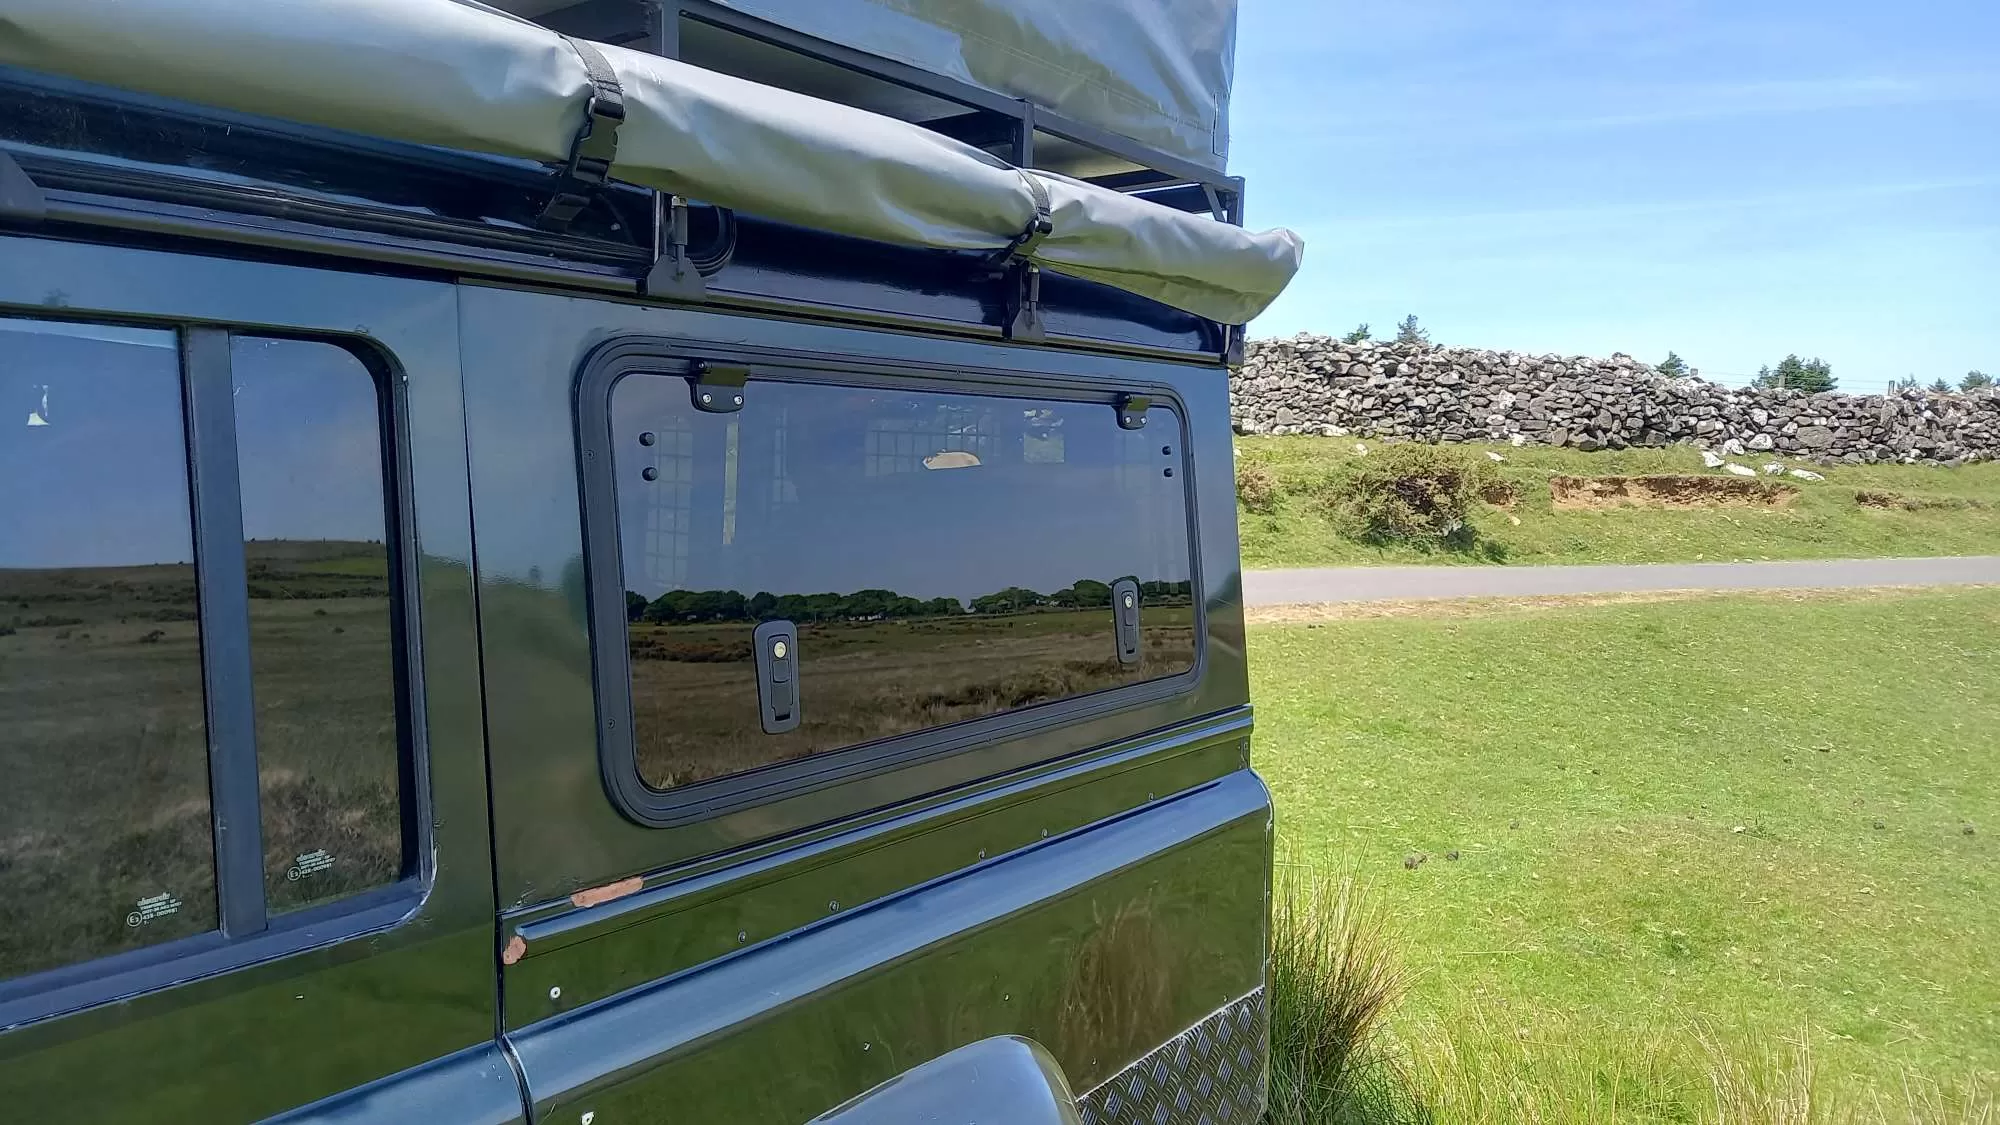 Explore Glazing Land Rover Defender gullwing window glass version.